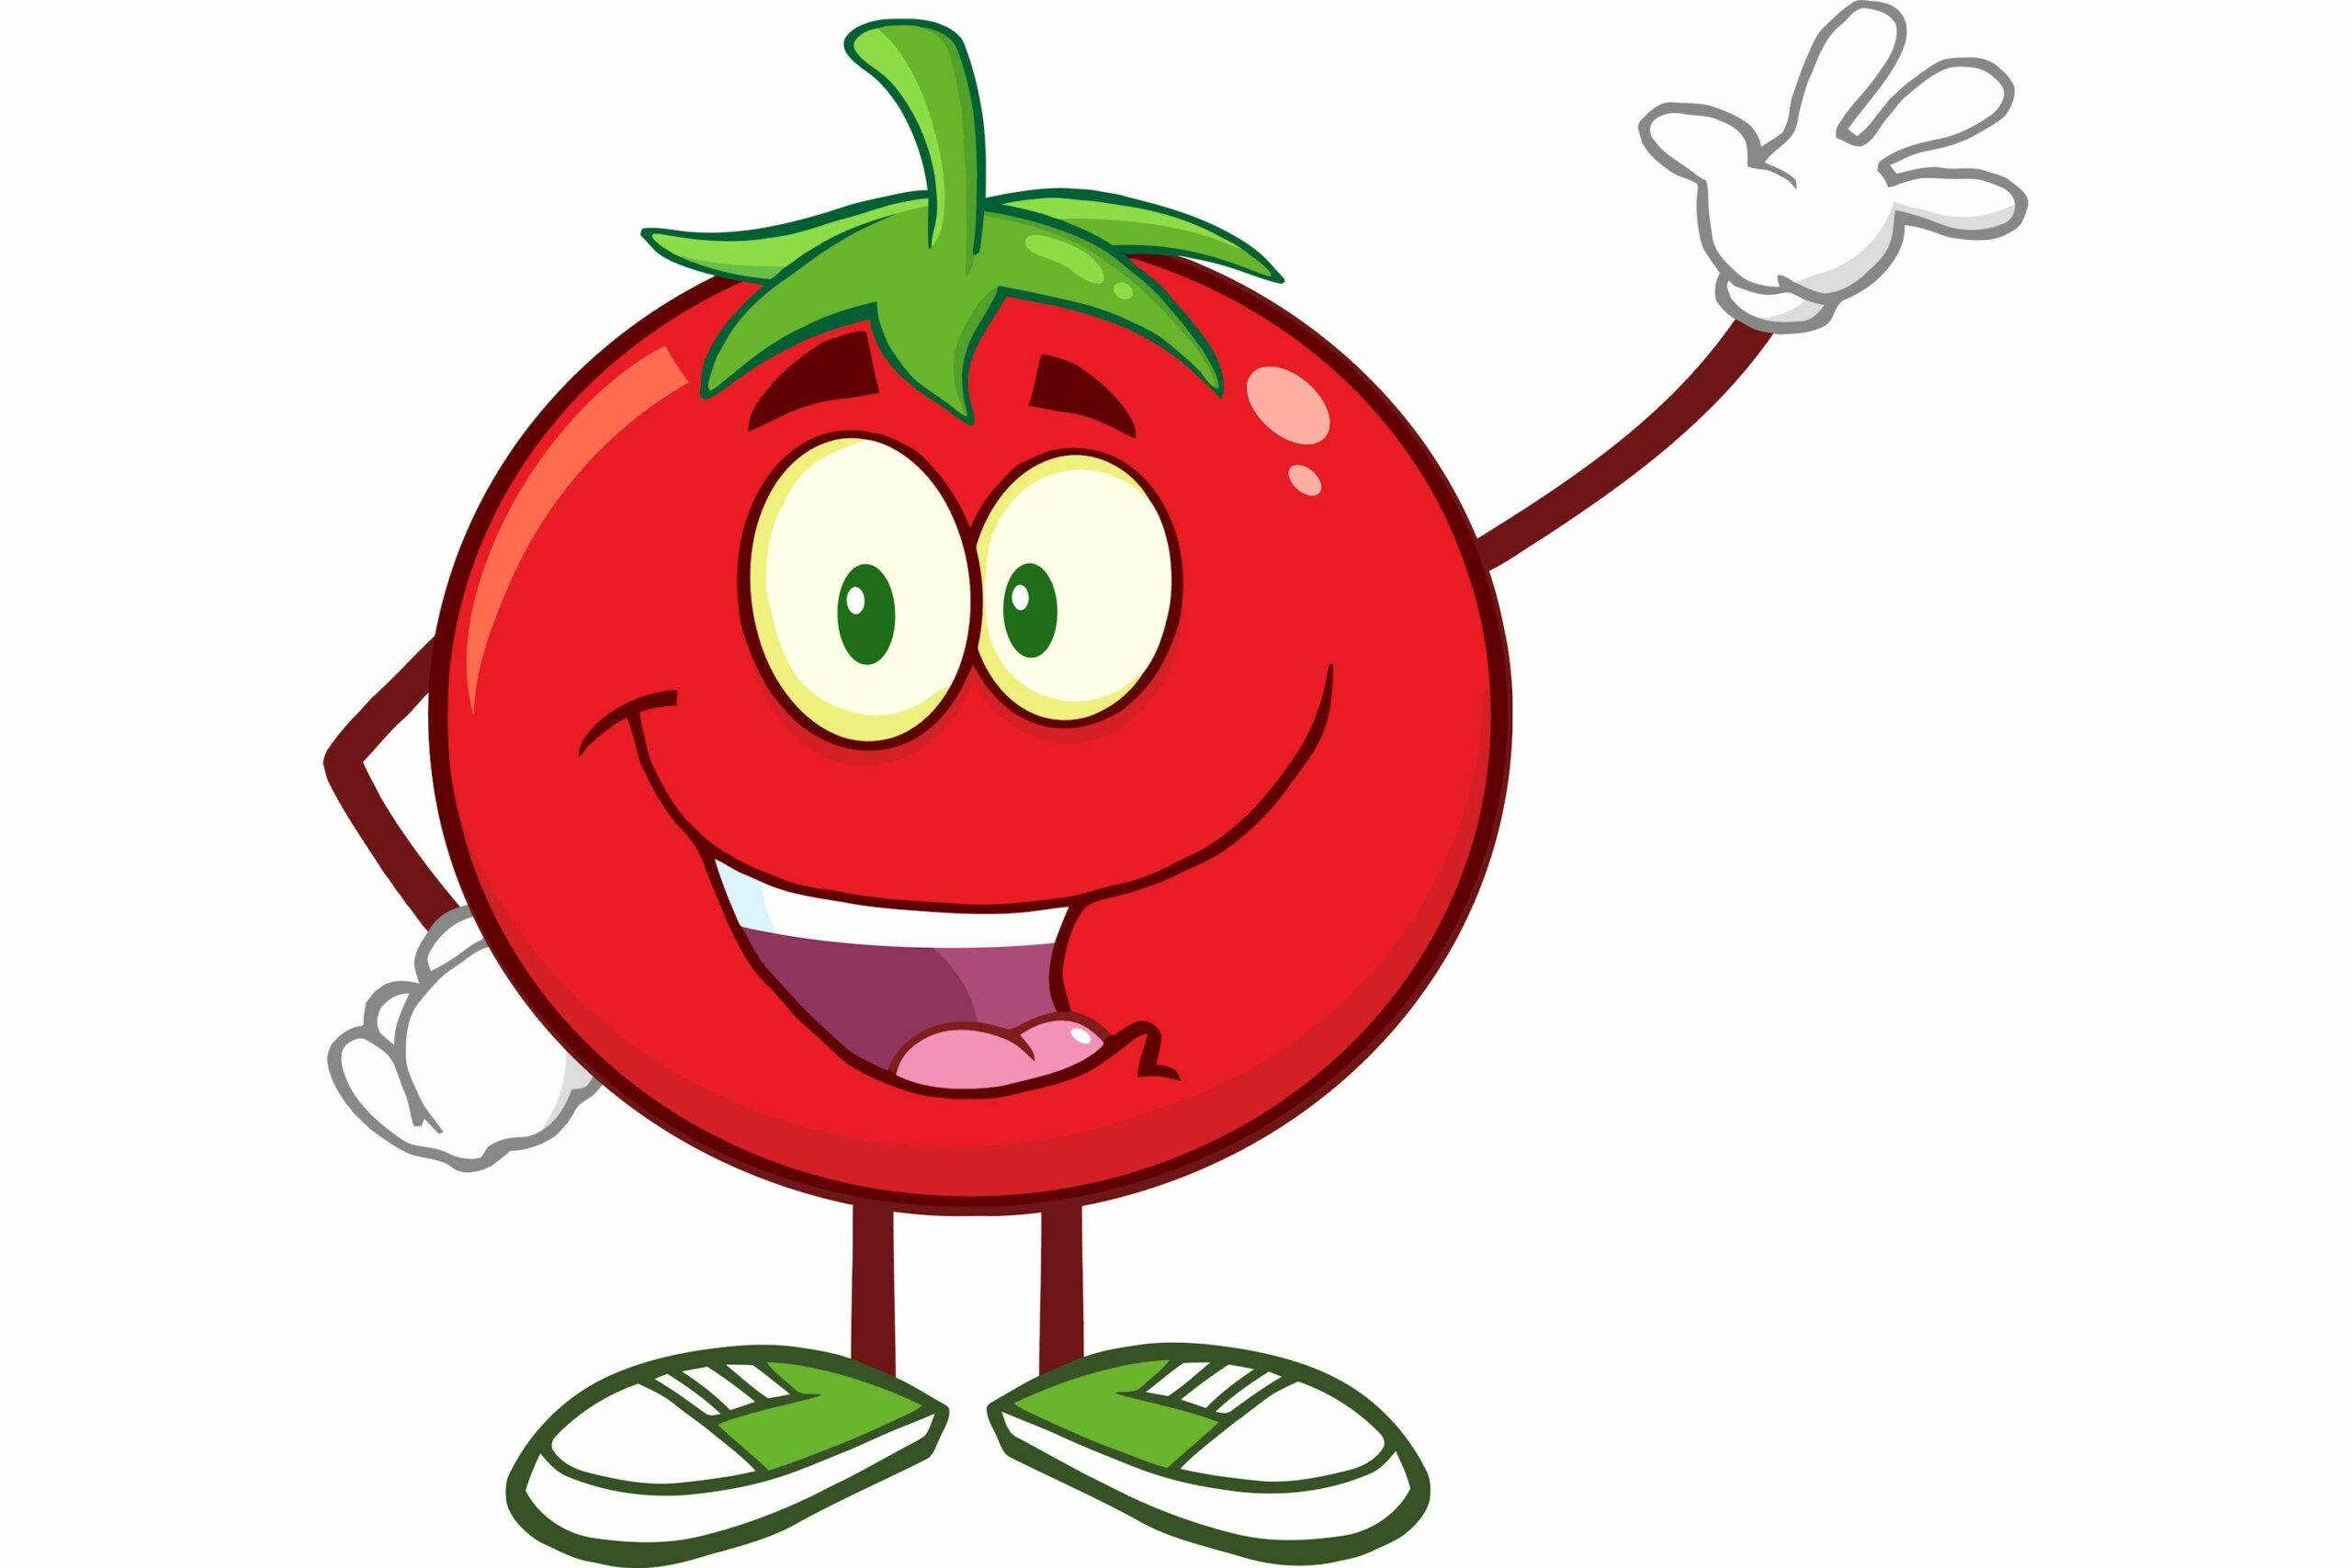 tomatovectorguy 9be92cbcf9044bffac8067c6519d74e5 scaled